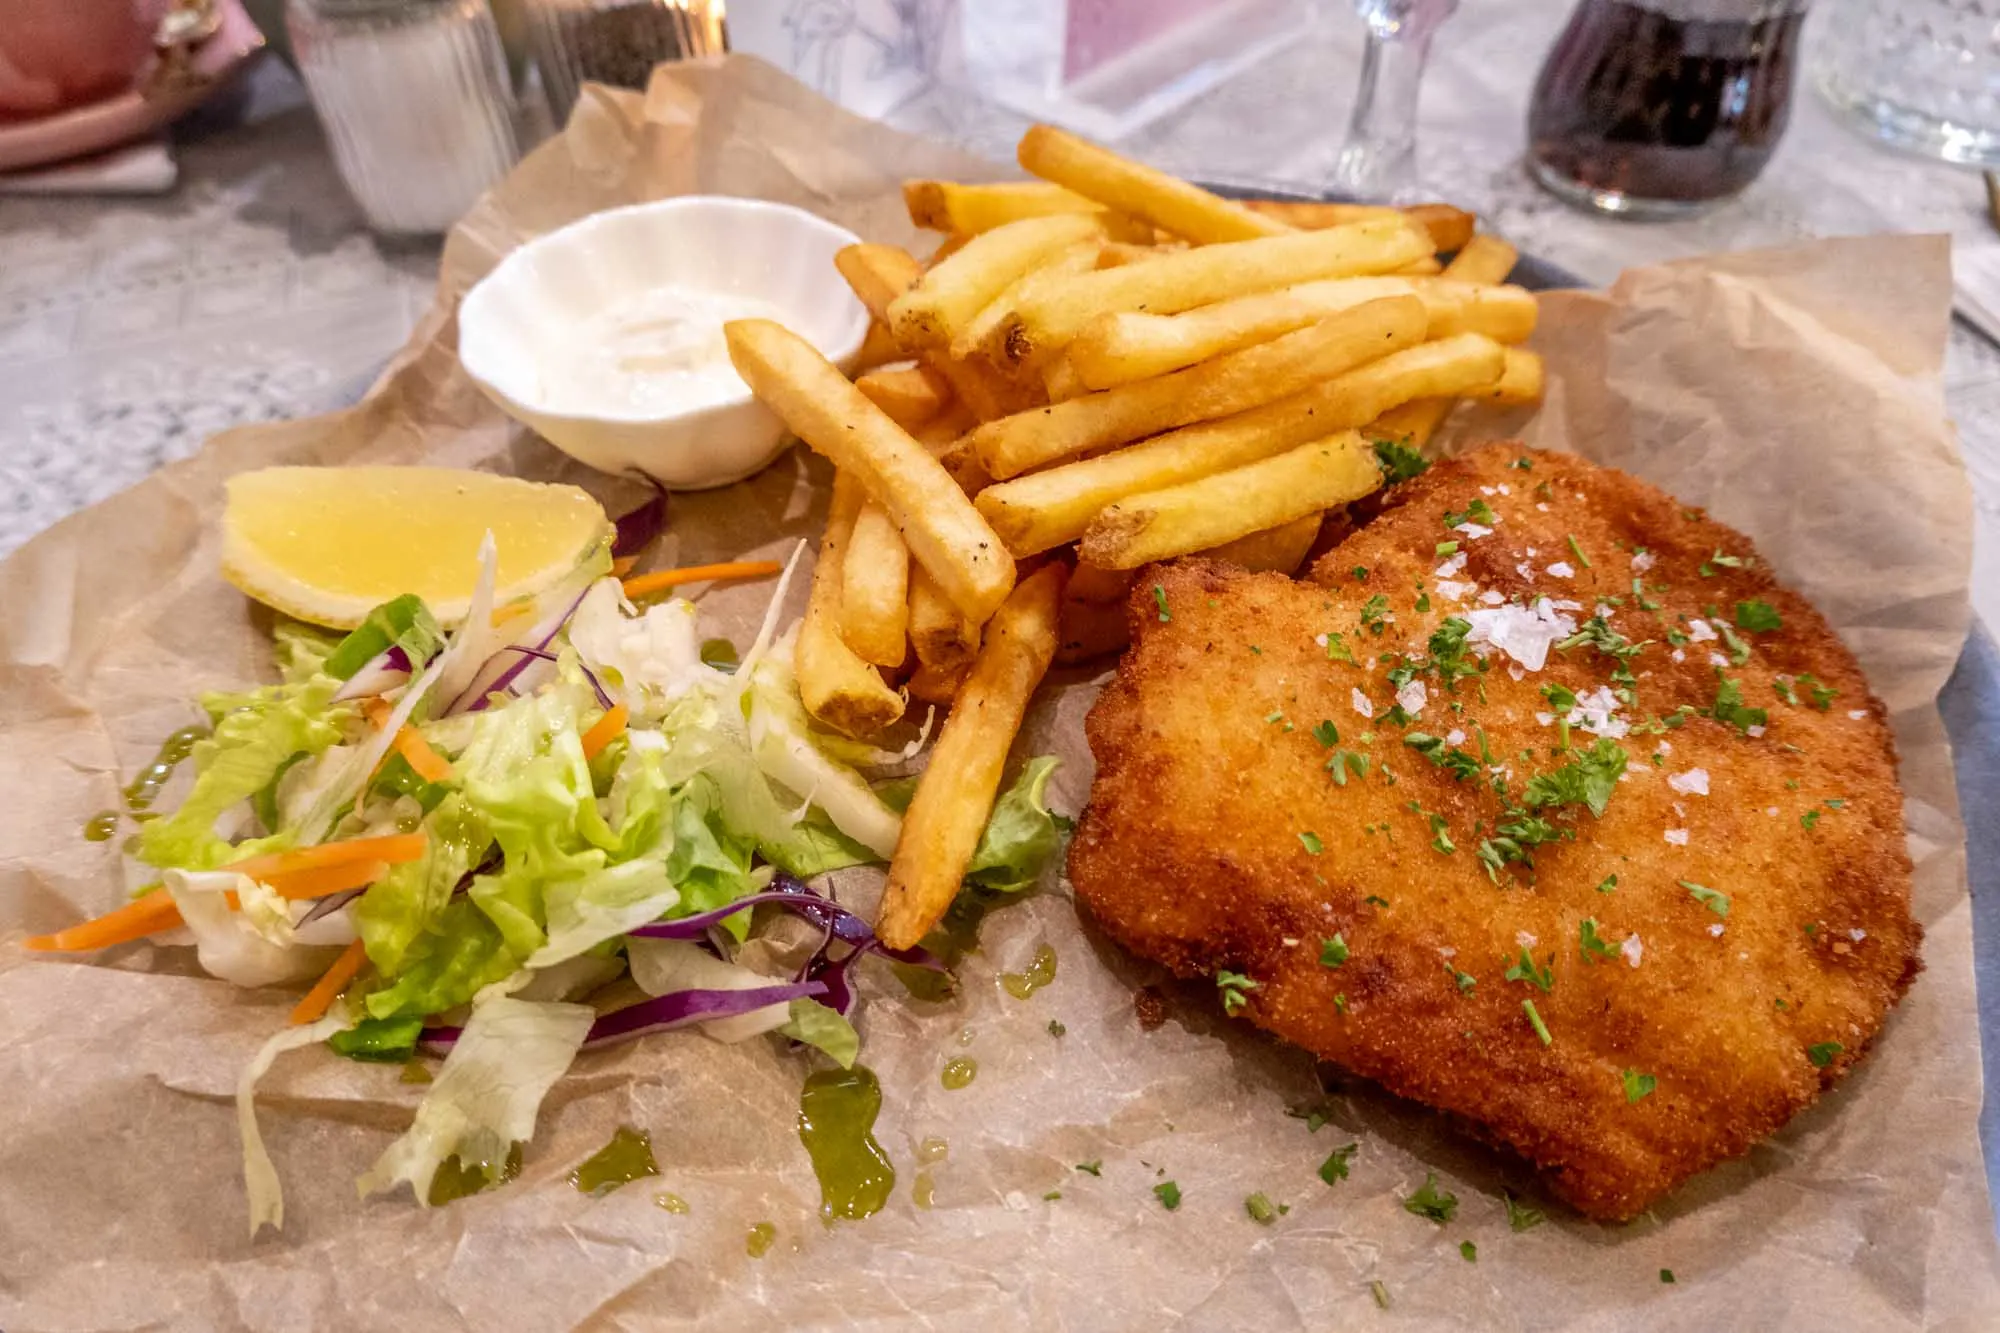 Fish& chips with salad on brown paper